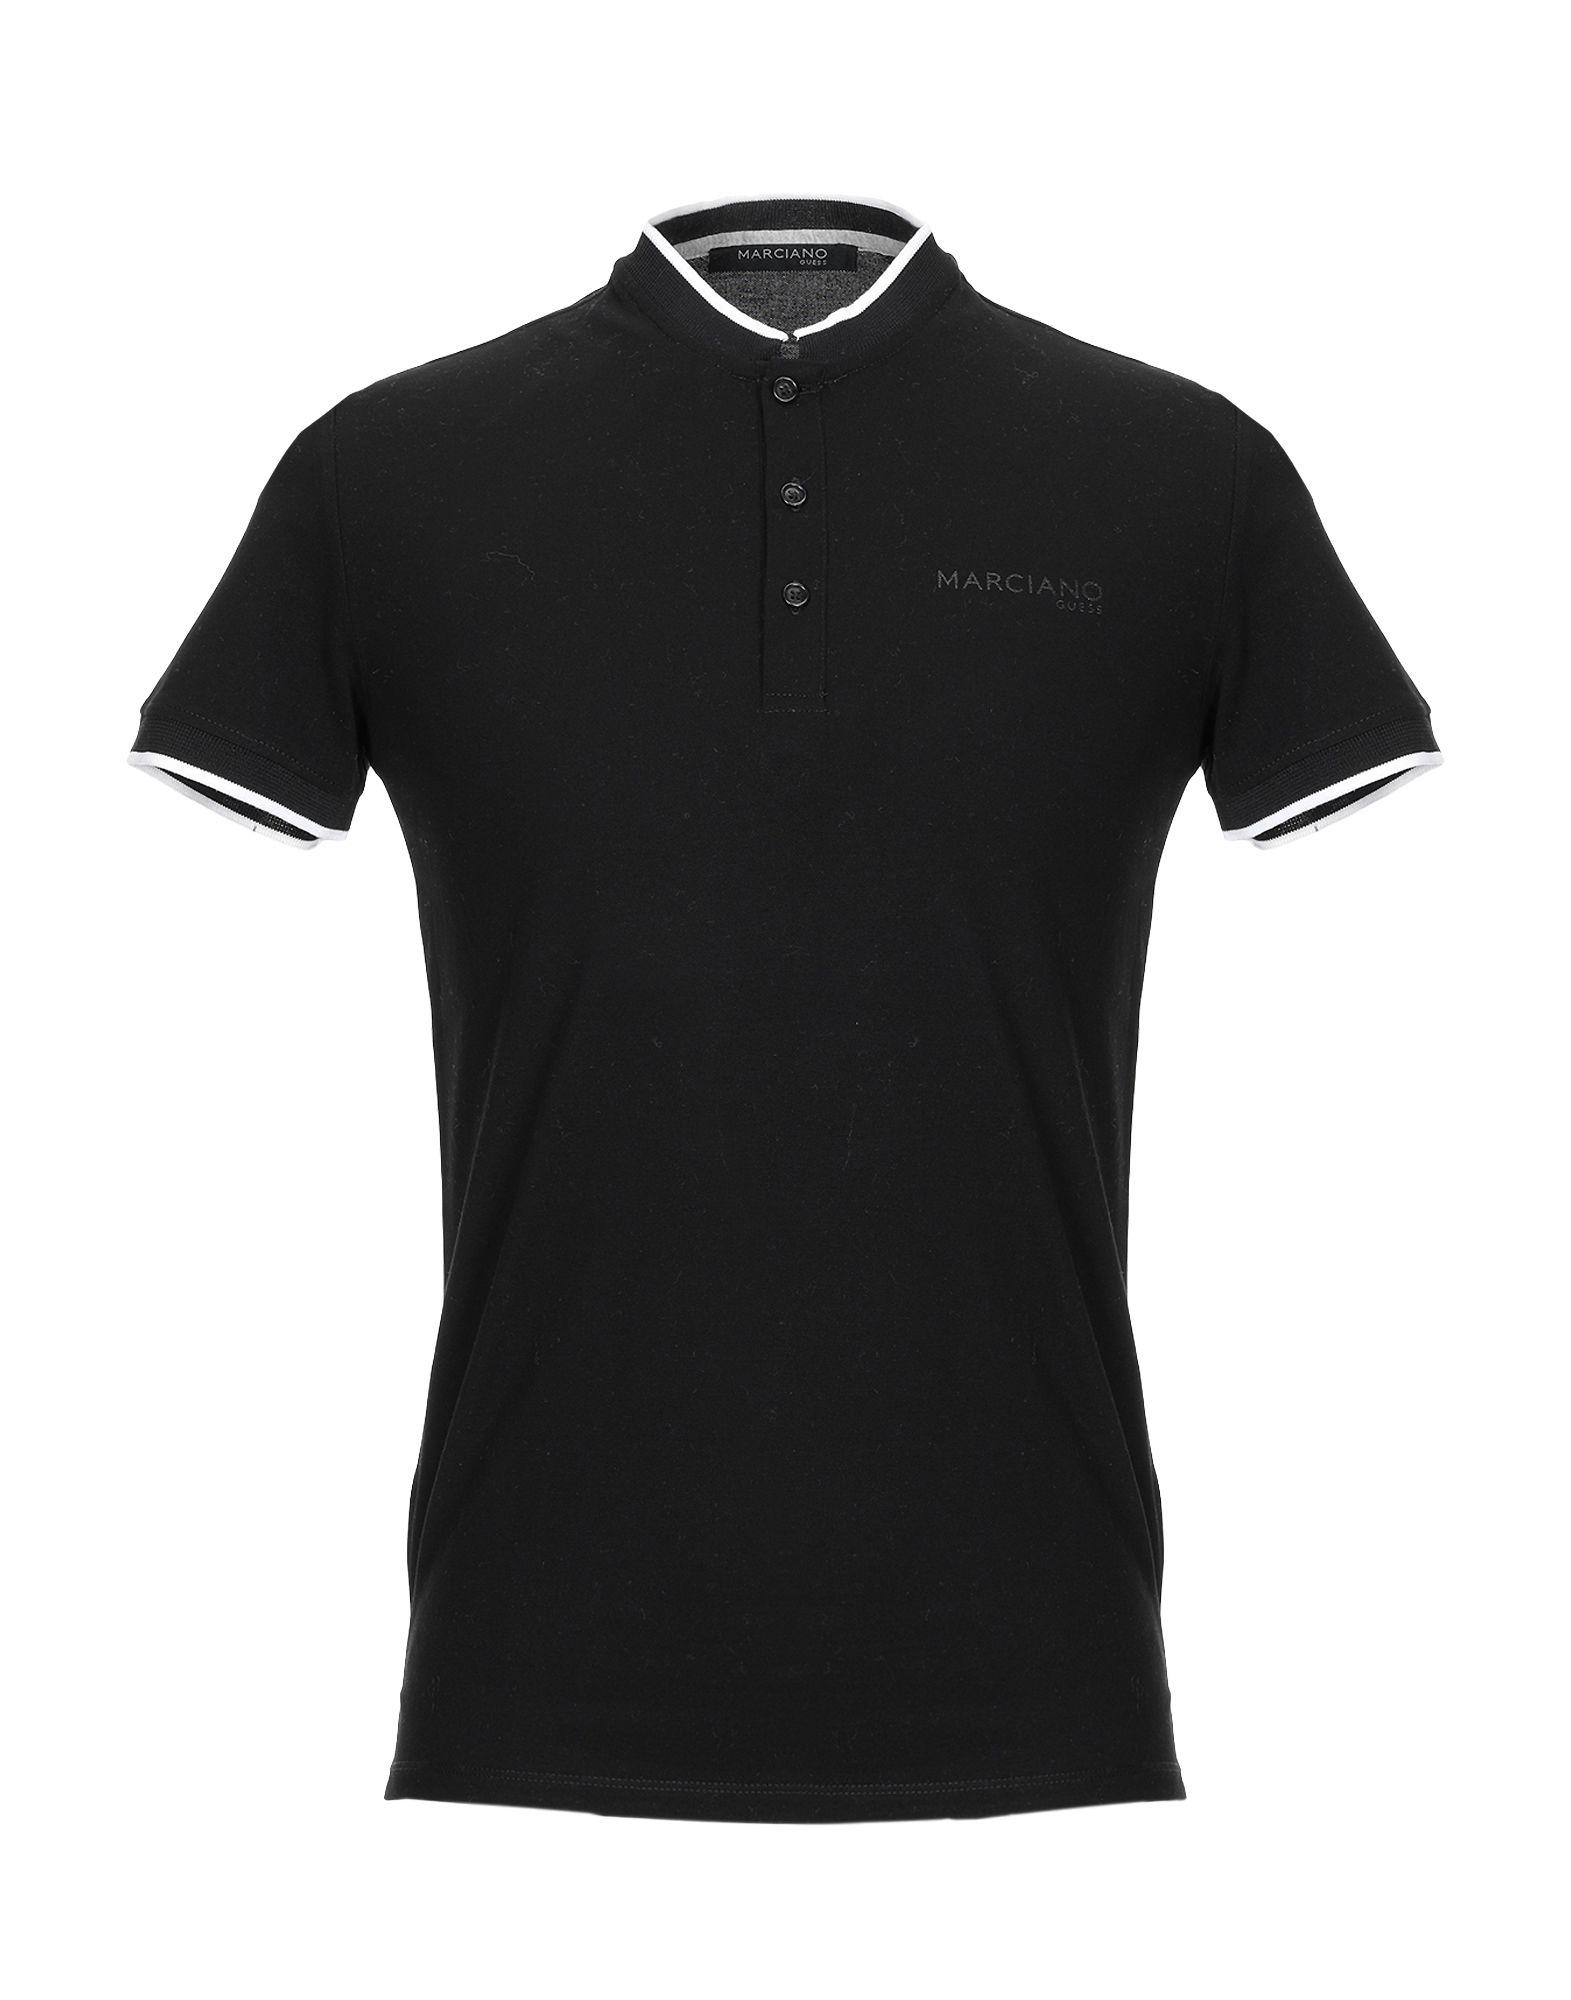 Guess Cotton Polo Shirt in Black for Men - Lyst